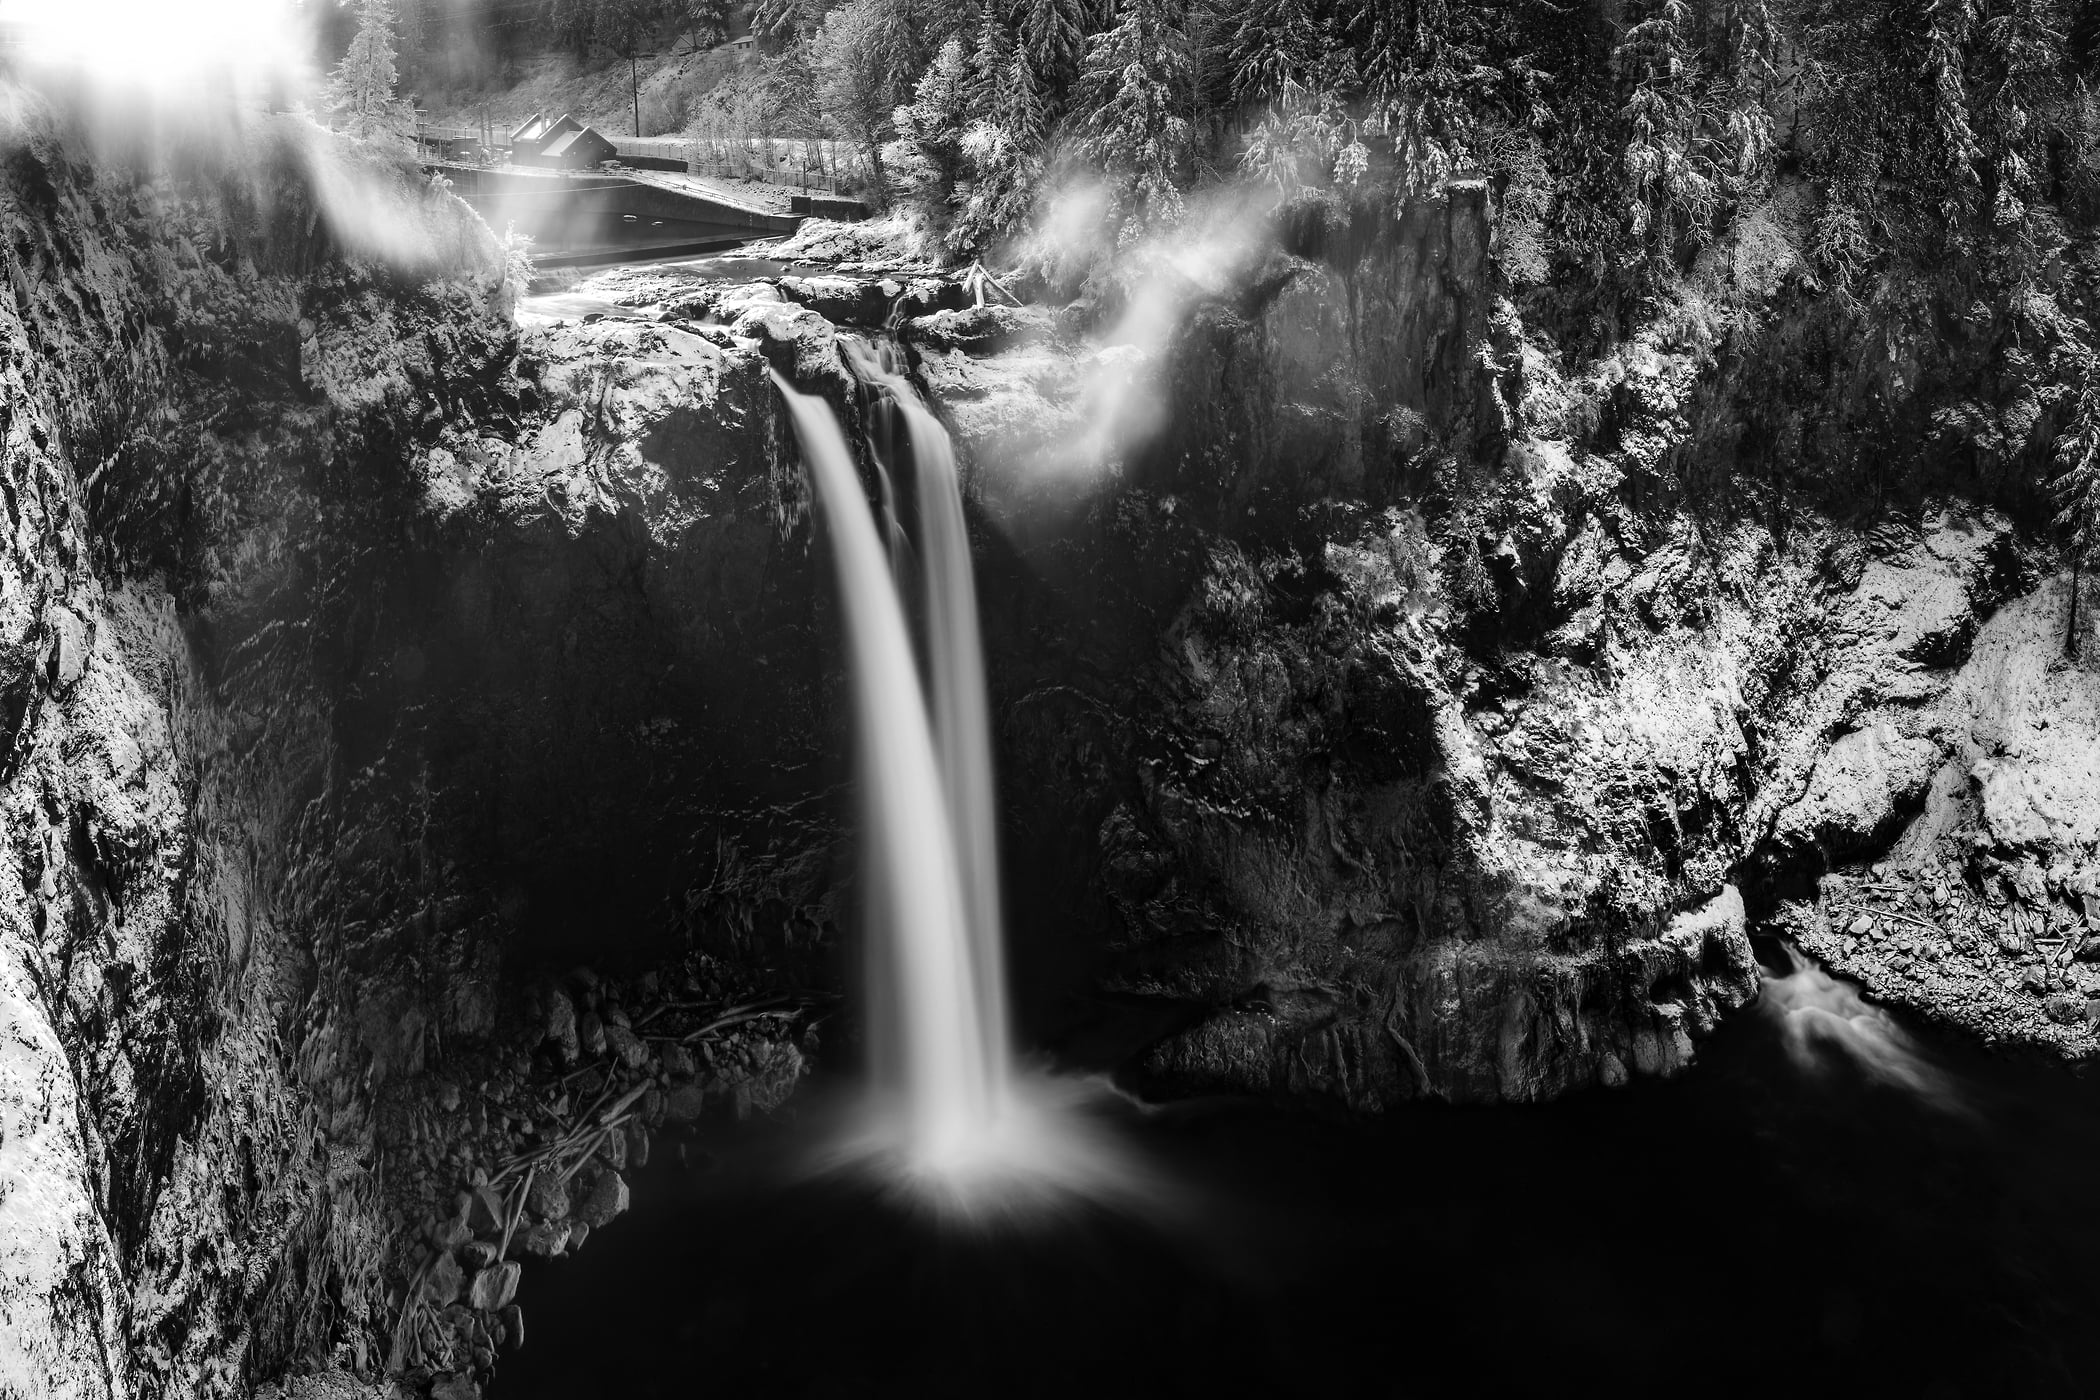 315 megapixels! A very high resolution, large-format VAST photo print of a waterfall in the winter with snow and ice; black and white nature photograph created by Scott Rinckenberger in Snoqualmie Falls, Snoqualmie, Washington.